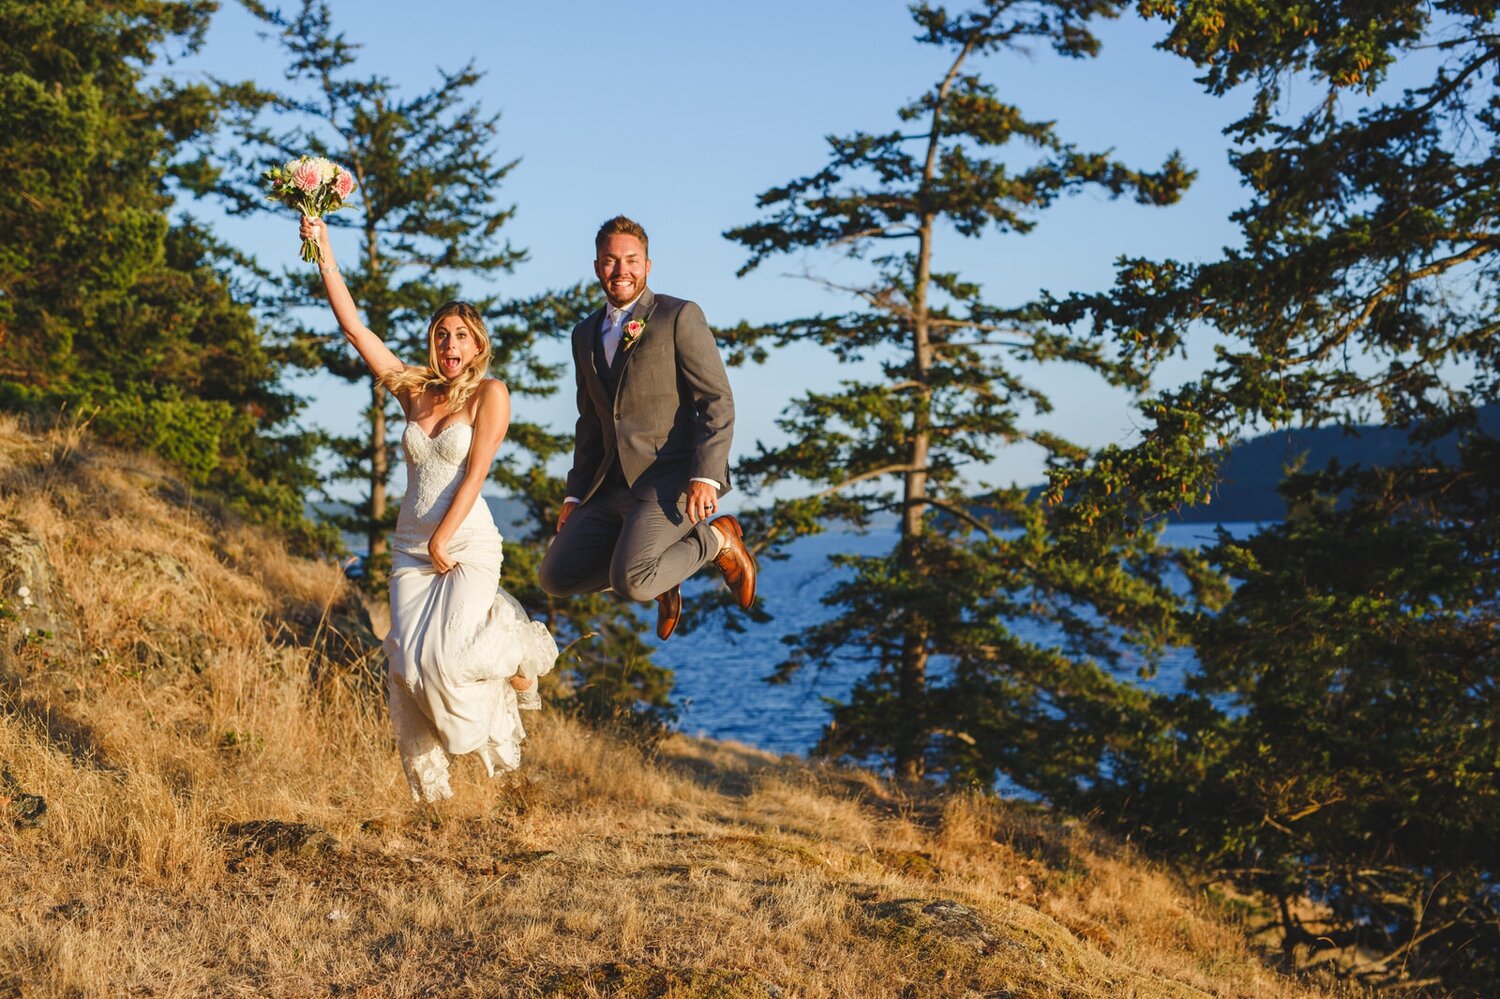 Bride and Groom Jumping at Sunset by Satya Curcio Photography